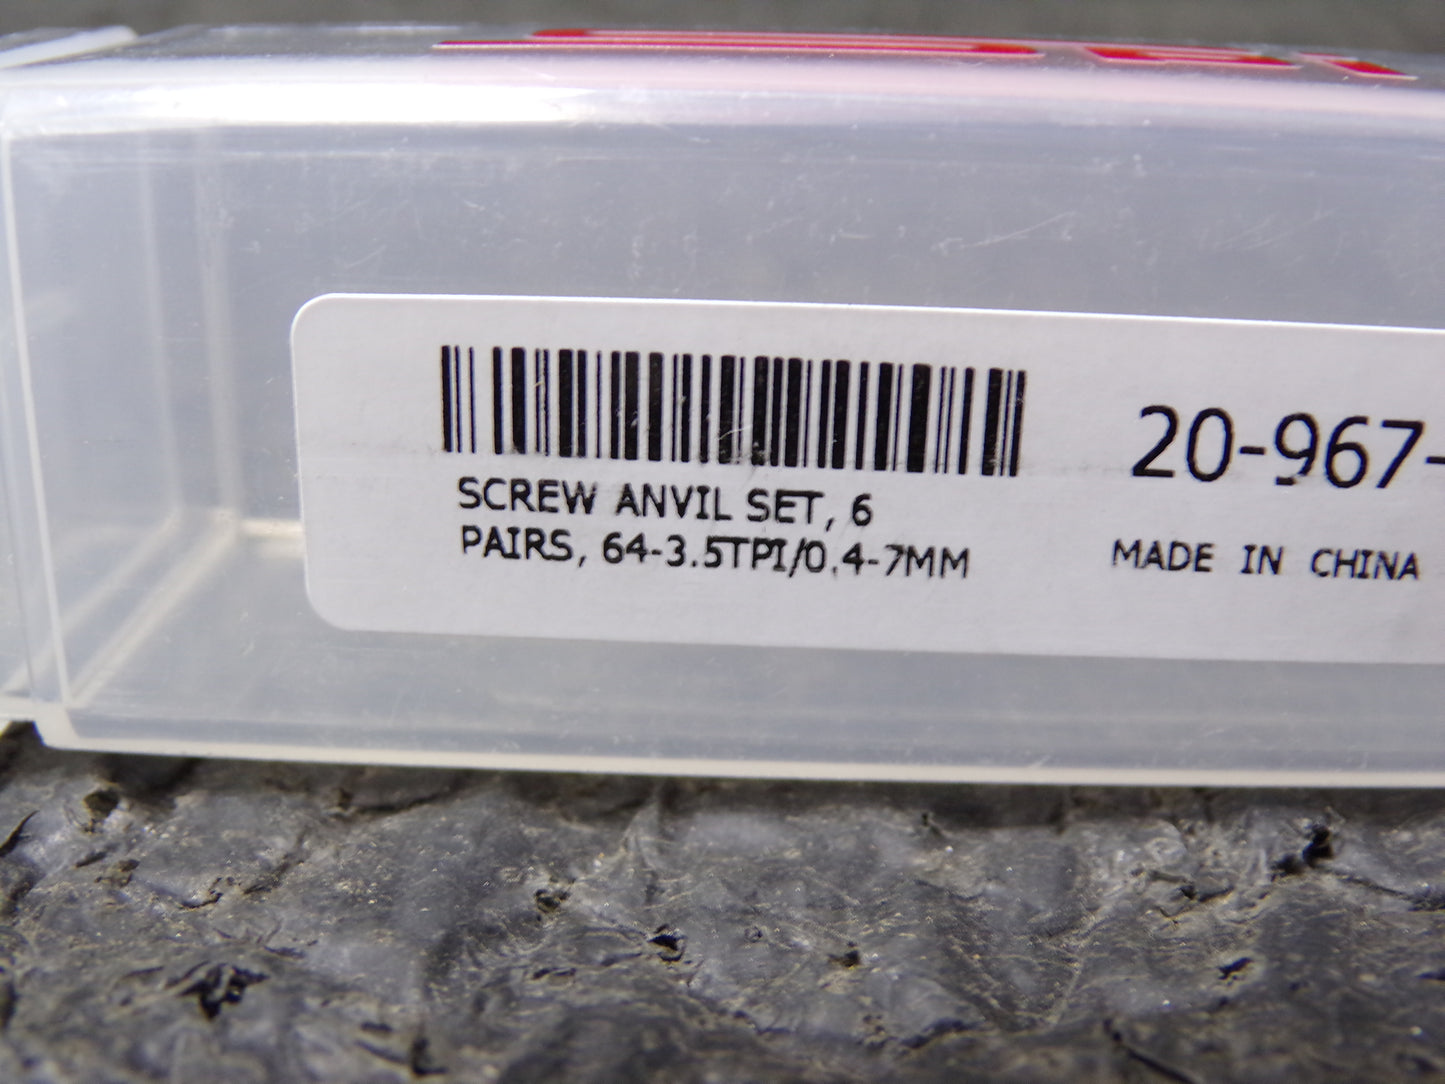 SPI Micrometer Anvil 0.4 to 0.7mm, Use with SPI Thread Micrometers, HAS A DEFECTIVE SNAP RING, (CR00613-WTA15)